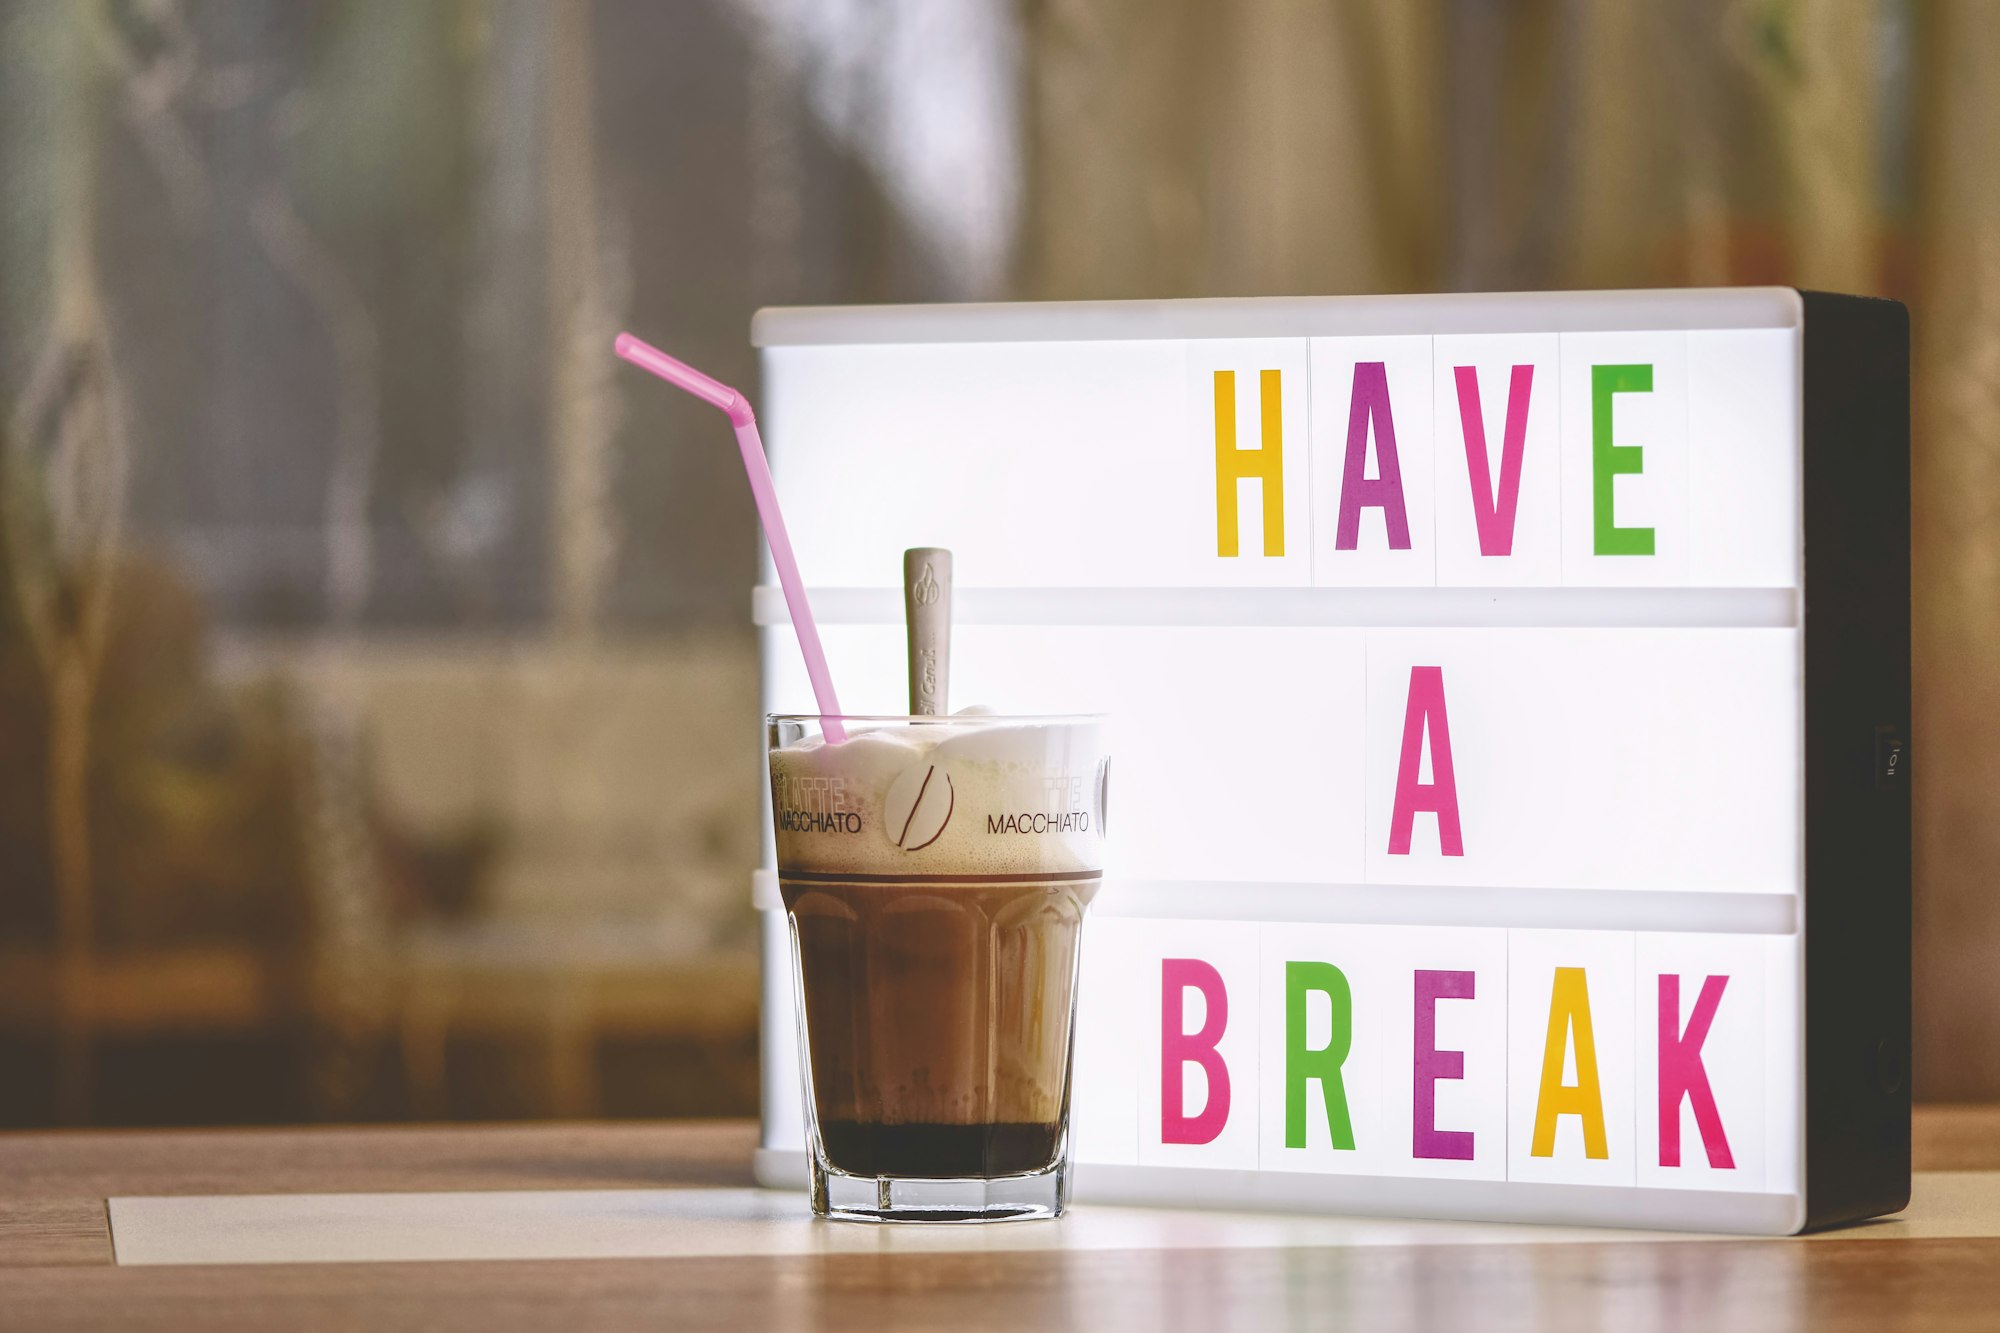 Signing stating "Have a Break" (Photo by Alexas_Fotos / Unsplash)